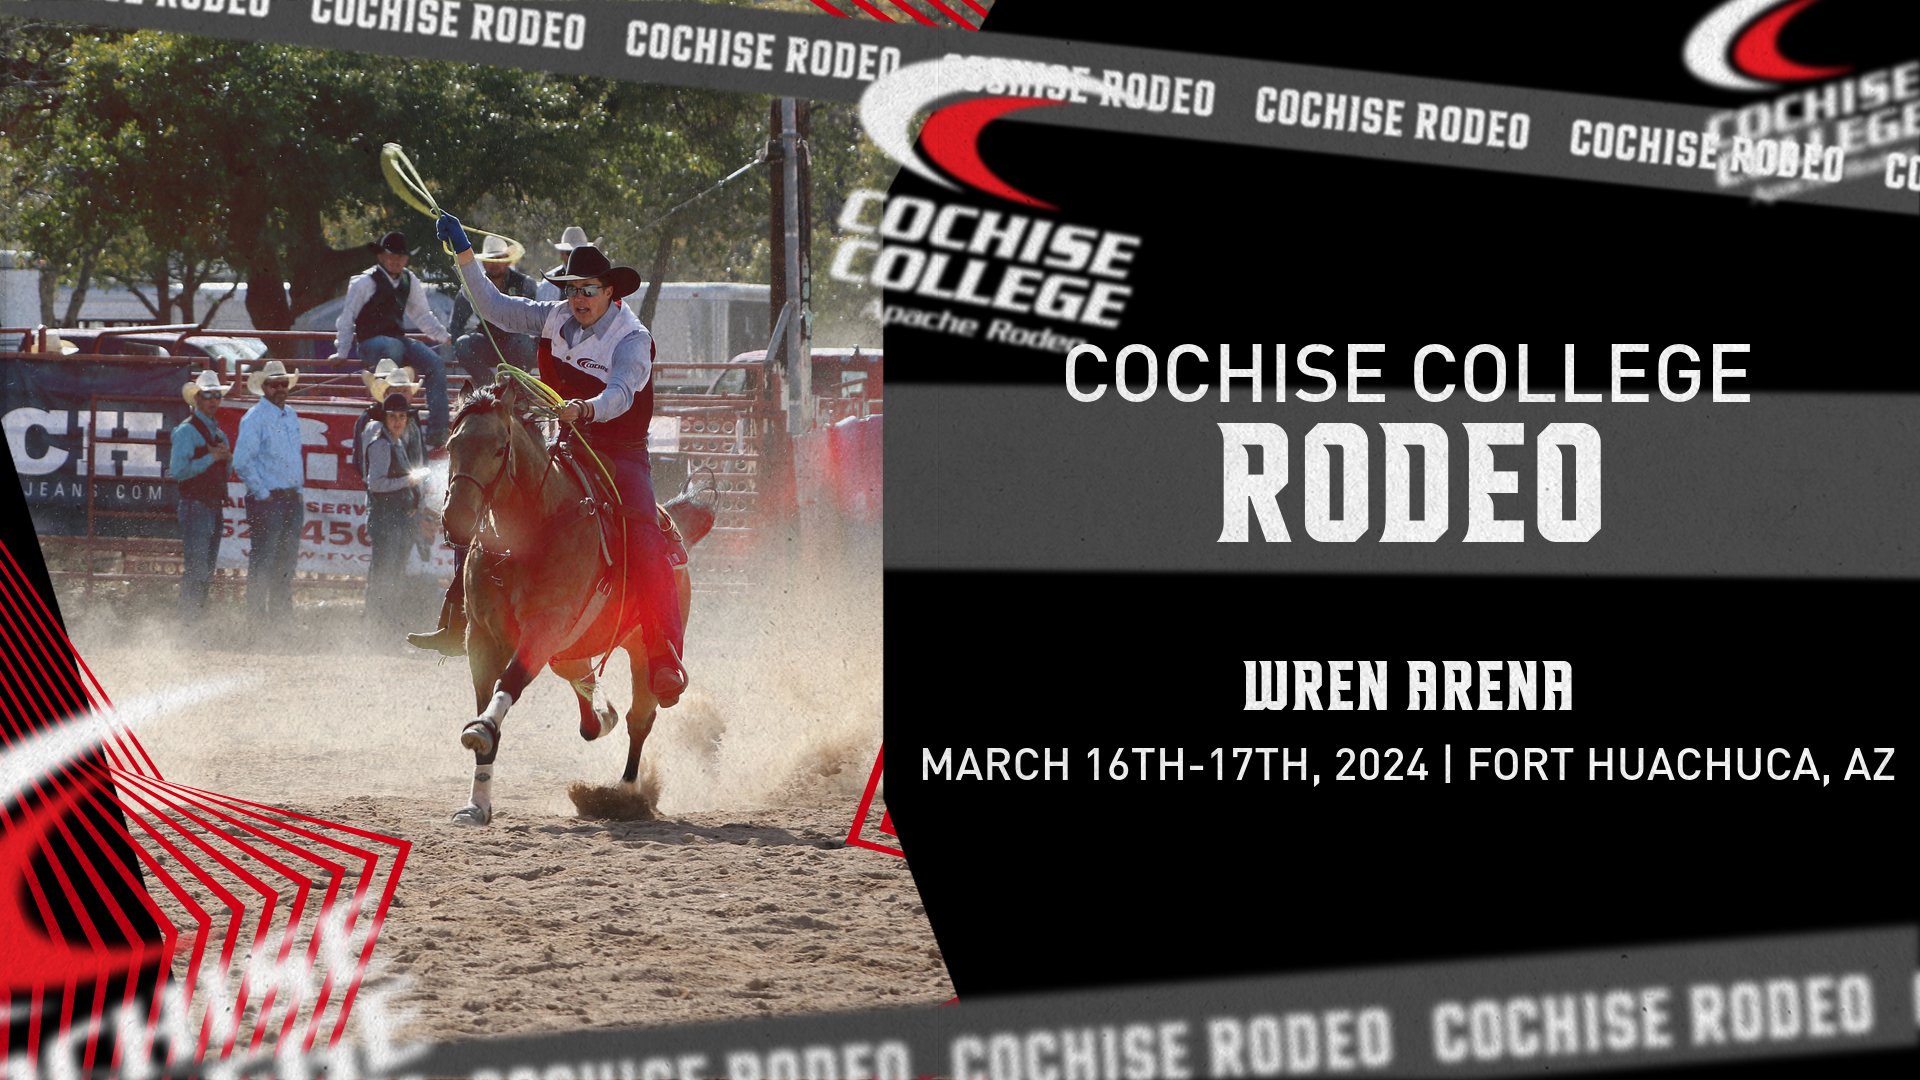 Cochise Rodeo